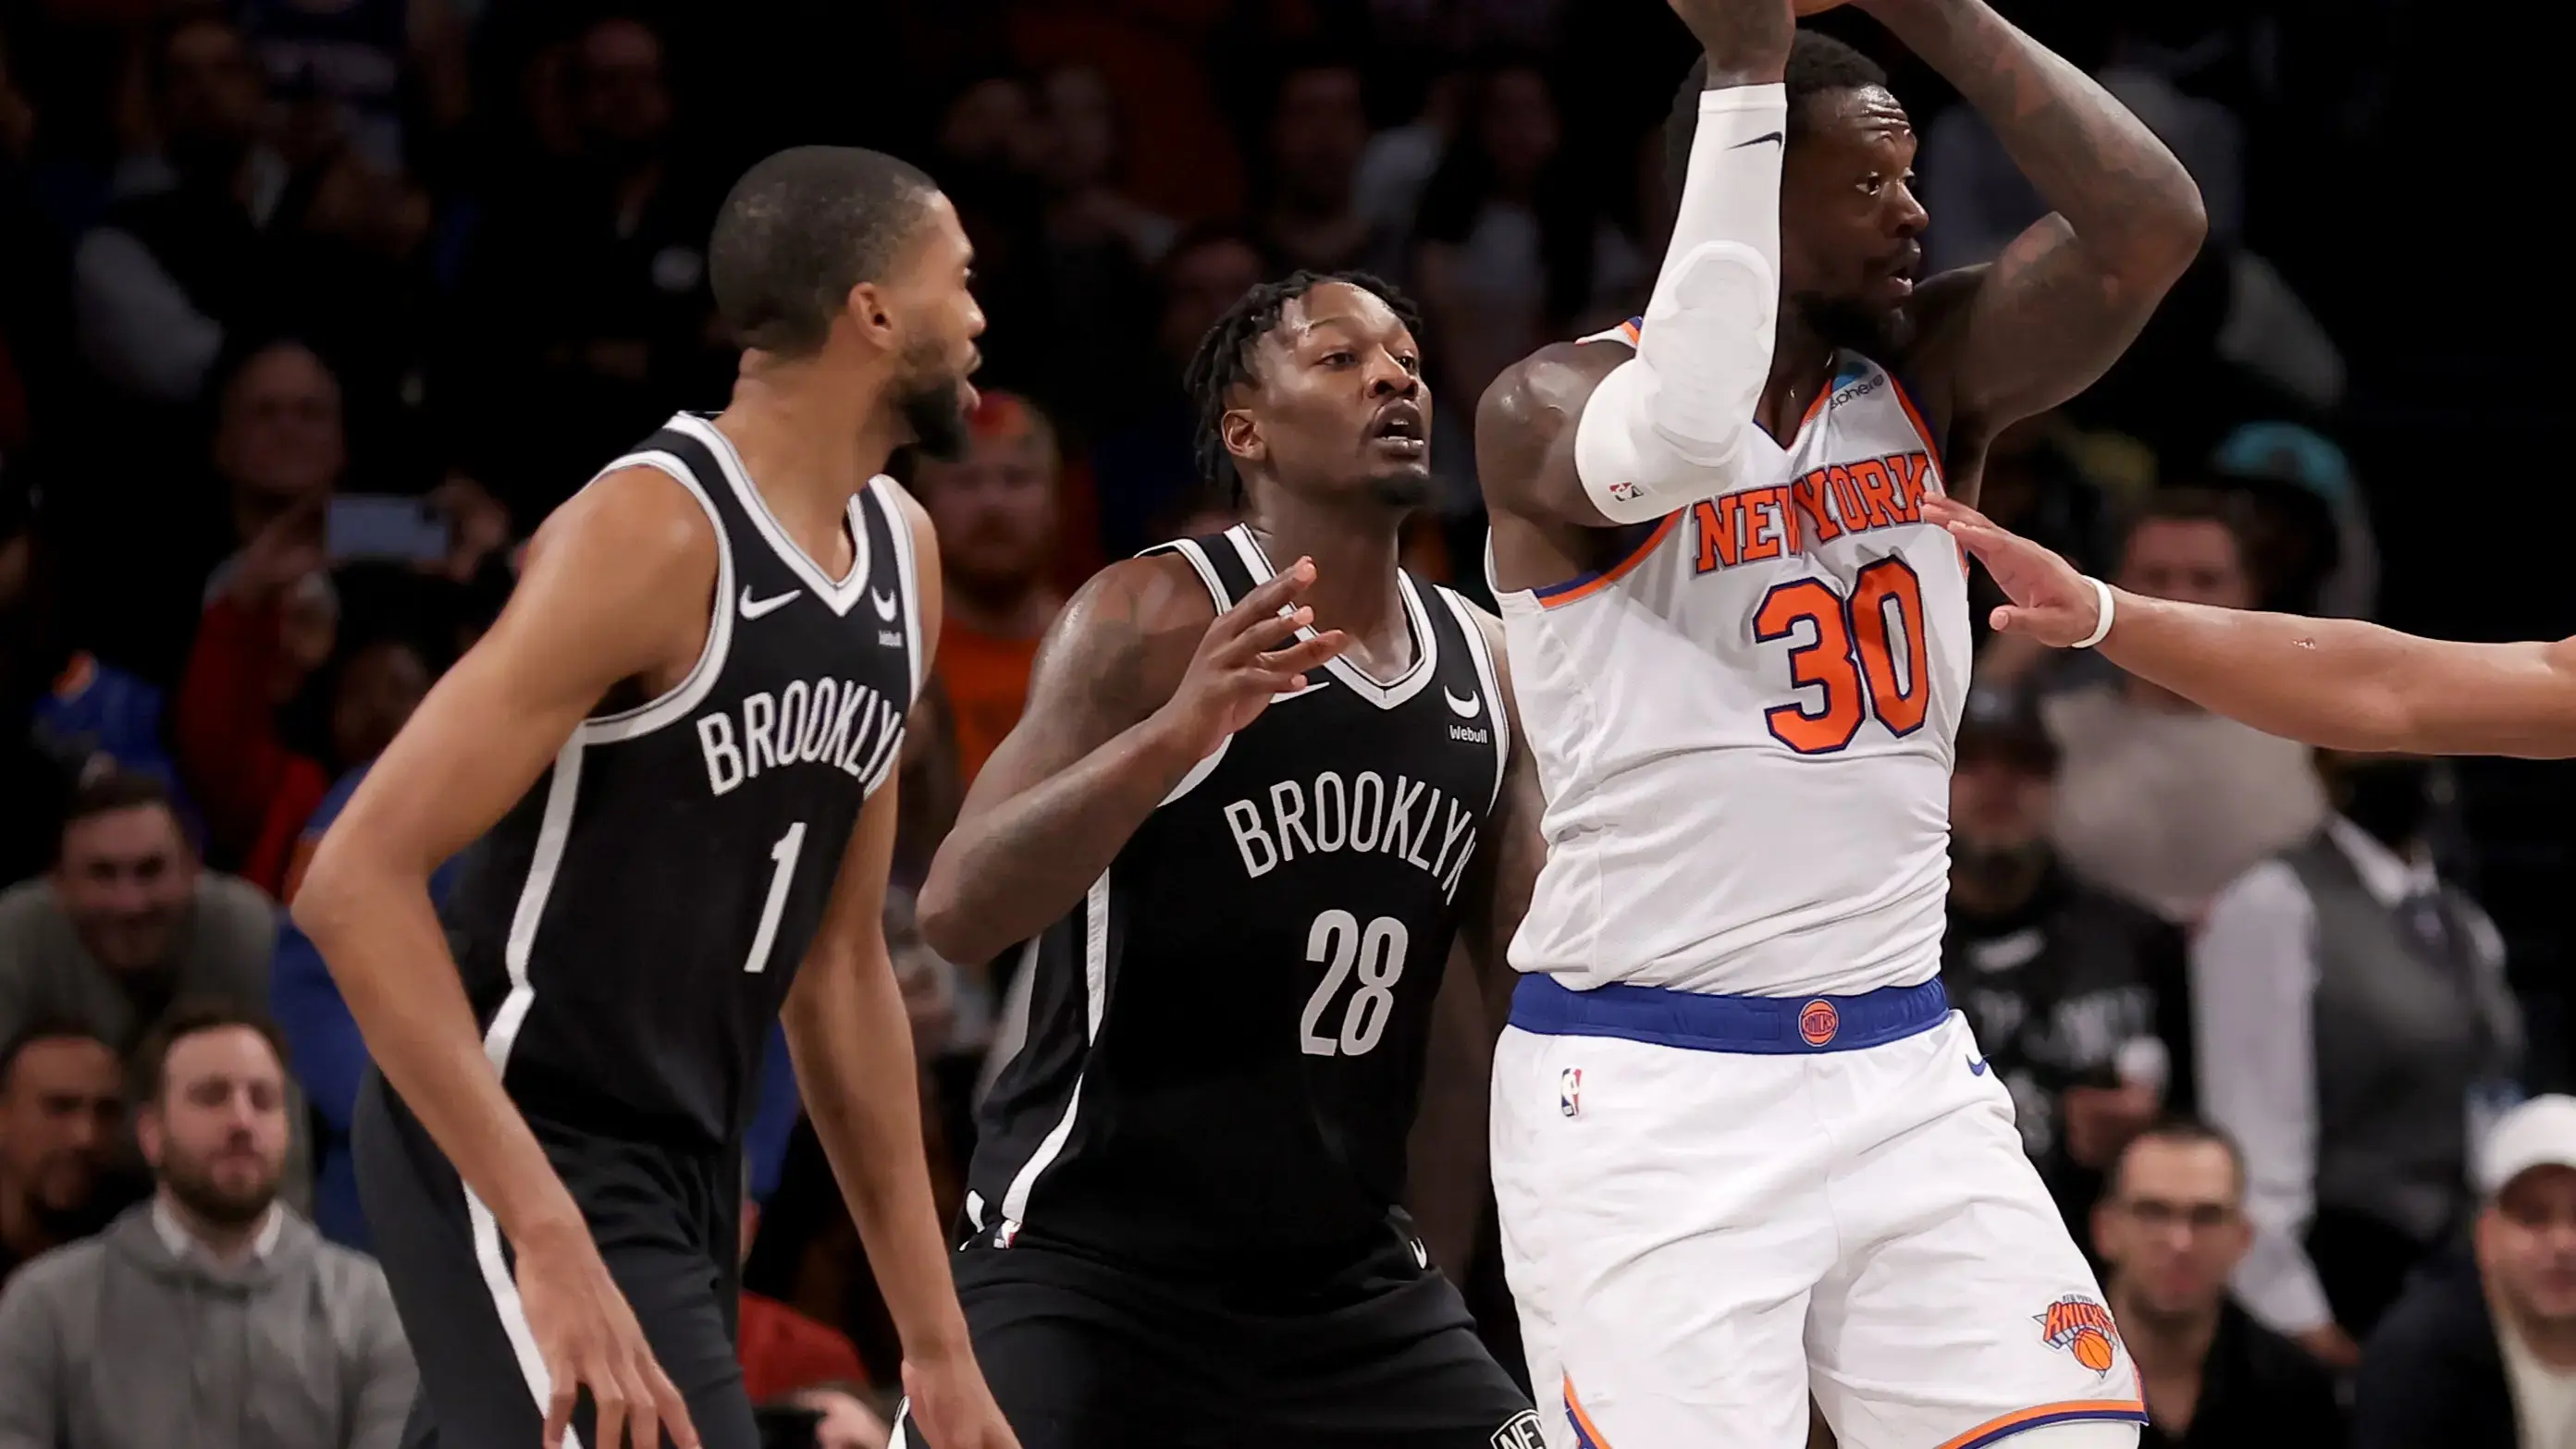 Jan 23, 2024; Brooklyn, New York, USA; New York Knicks forward Julius Randle (30) looks to pass the ball against Brooklyn Nets forwards Mikal Bridges (1) and Dorian Finney-Smith (28) and guard Dennis Smith Jr. (4) during the fourth quarter at Barclays Center. Mandatory Credit: Brad Penner-USA TODAY Sports